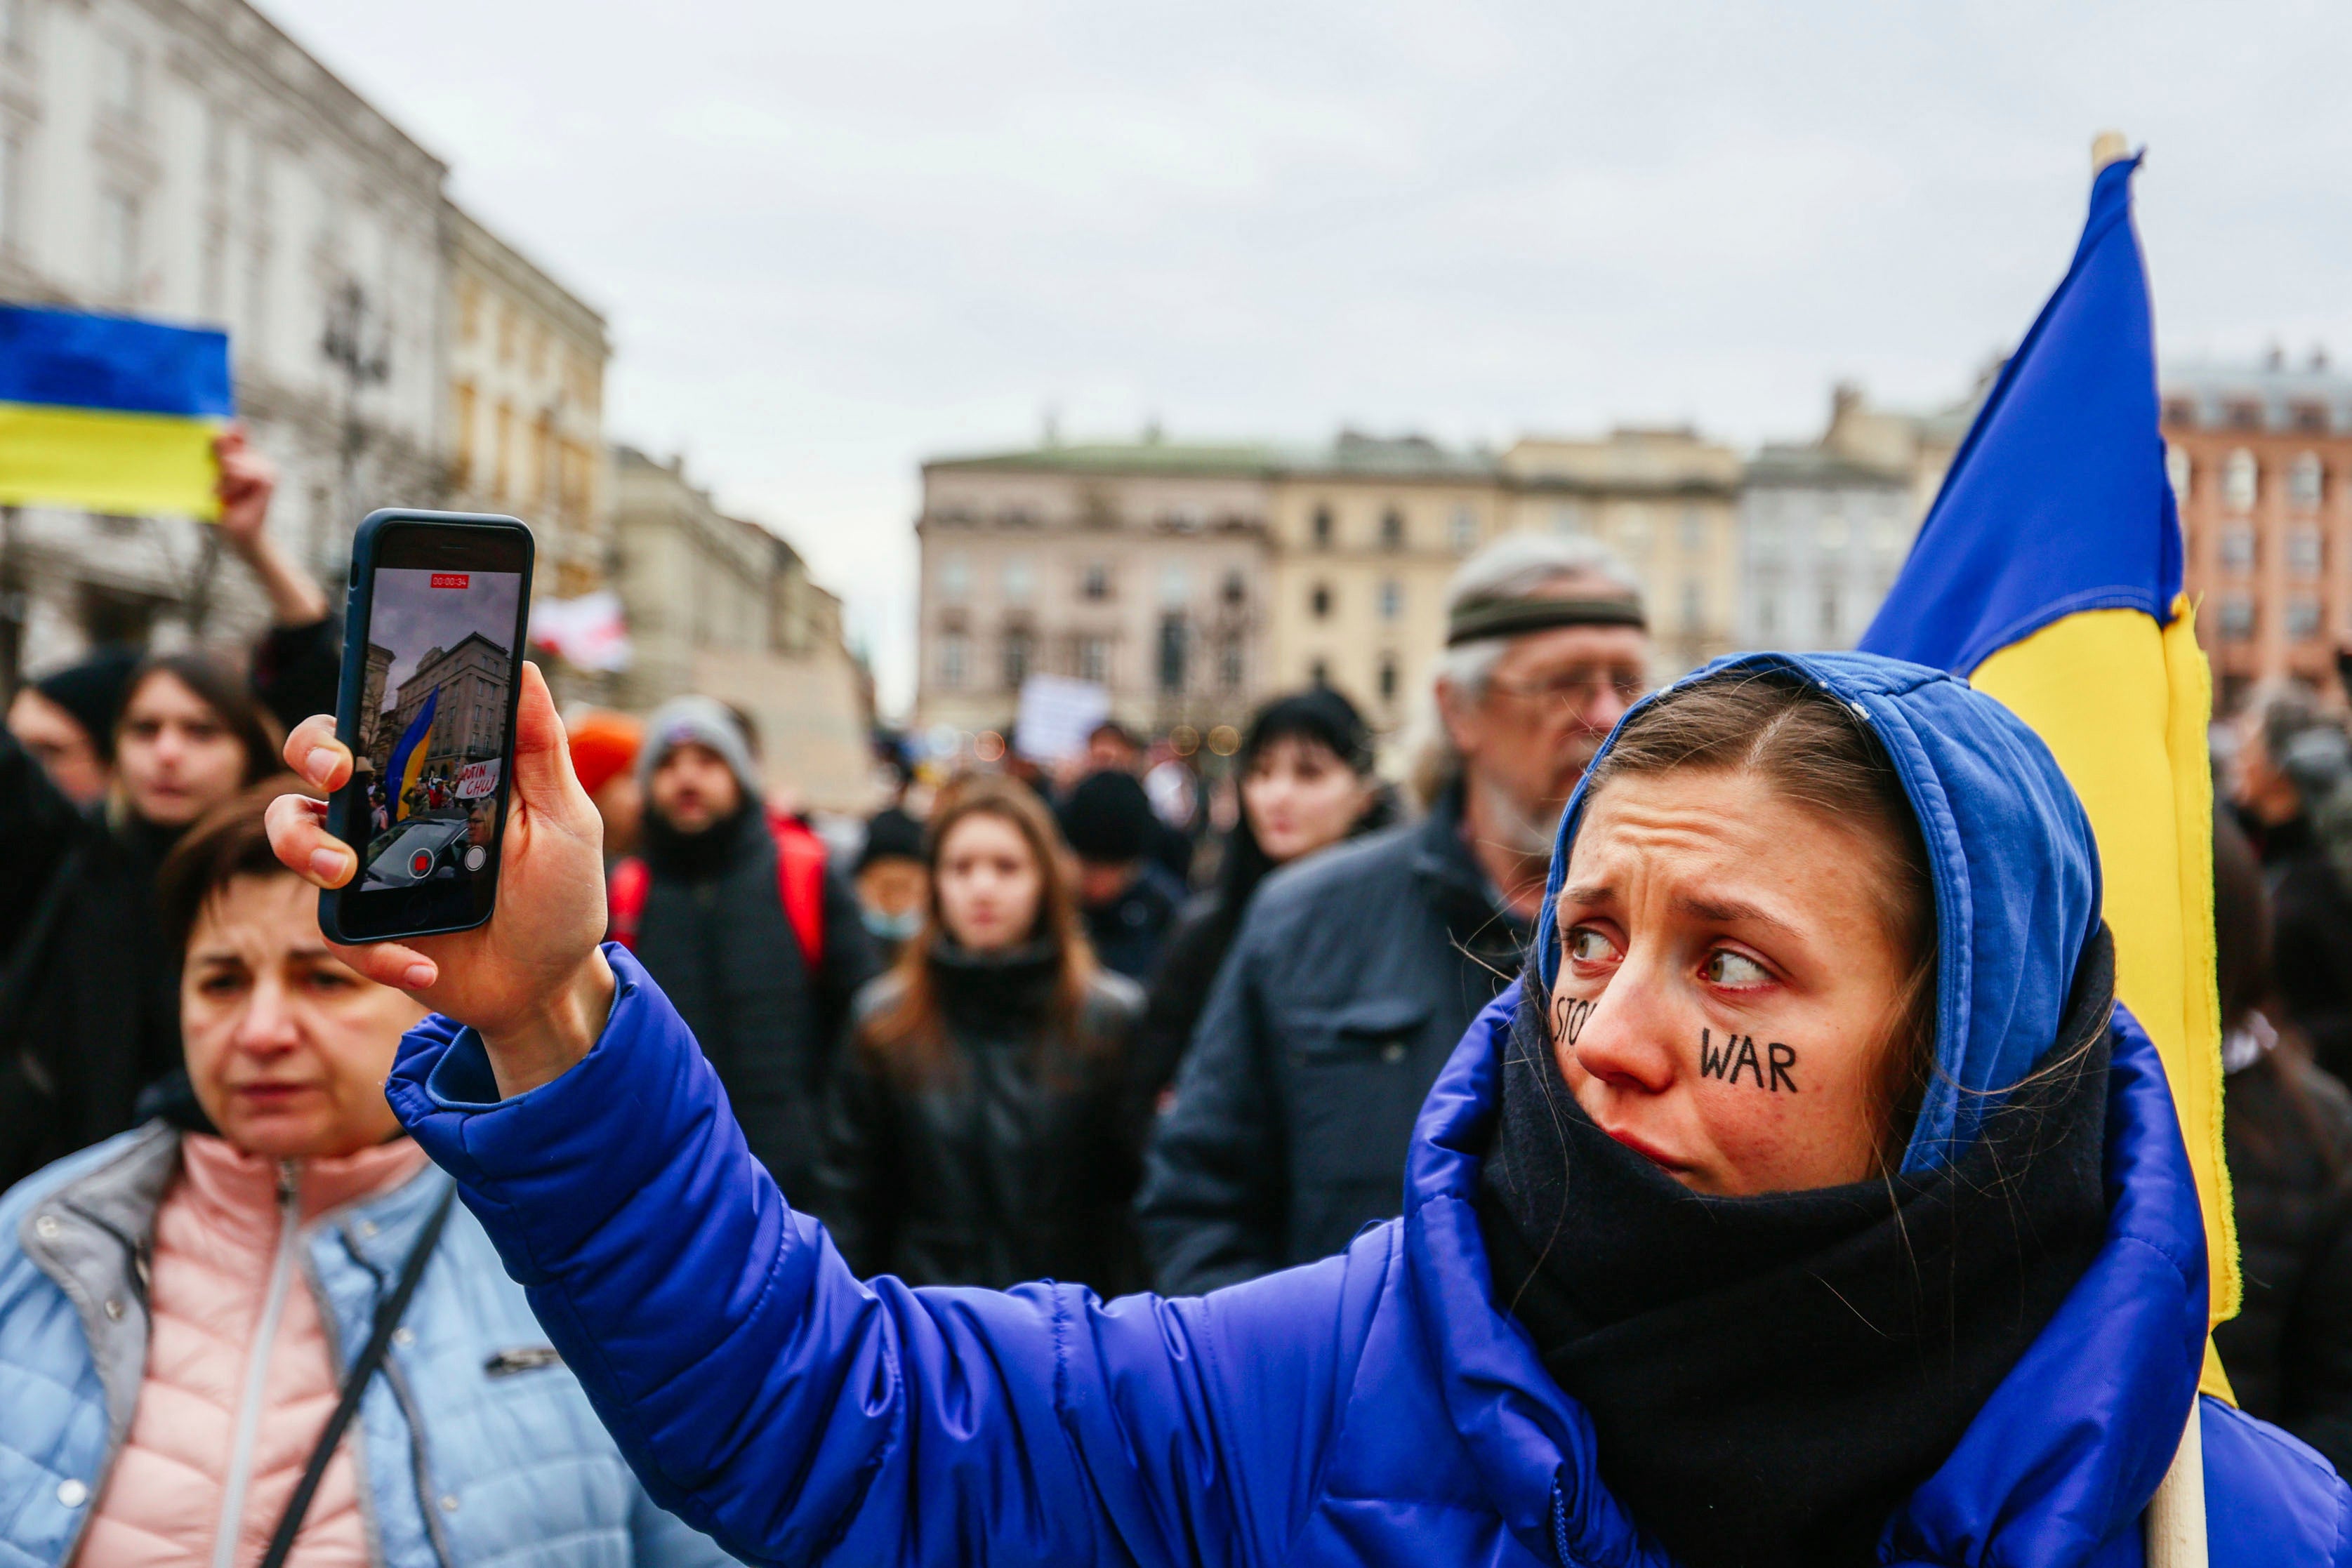 A protester holds up a phone during a demonstration